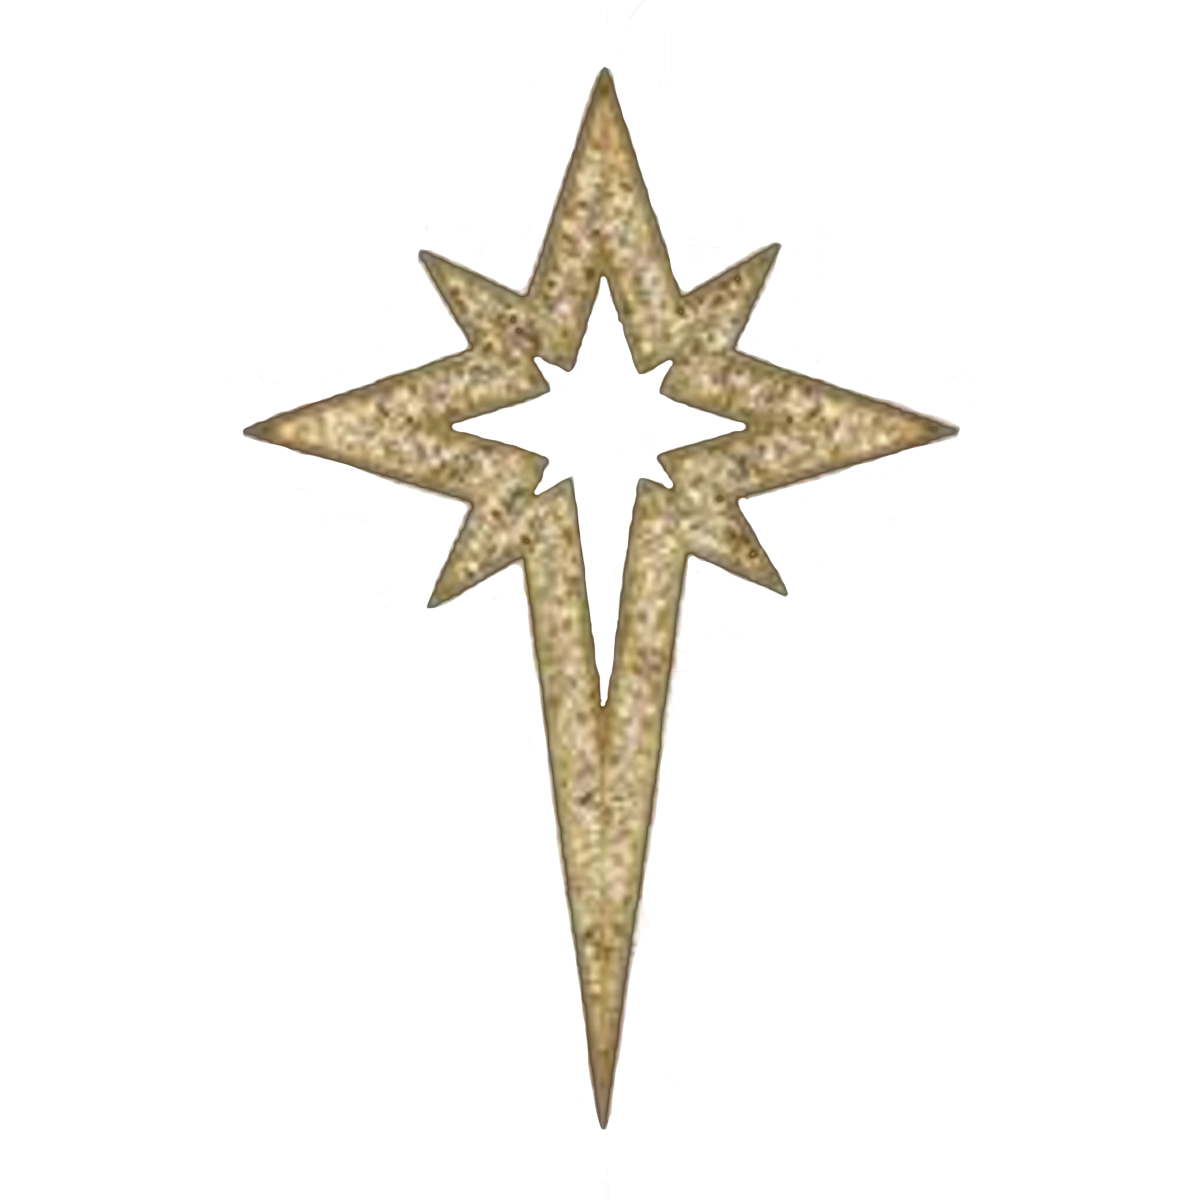 2D Christmas Display - 8 Point Star - Warm White LEDs - Gold - Large - 9.8ft tall